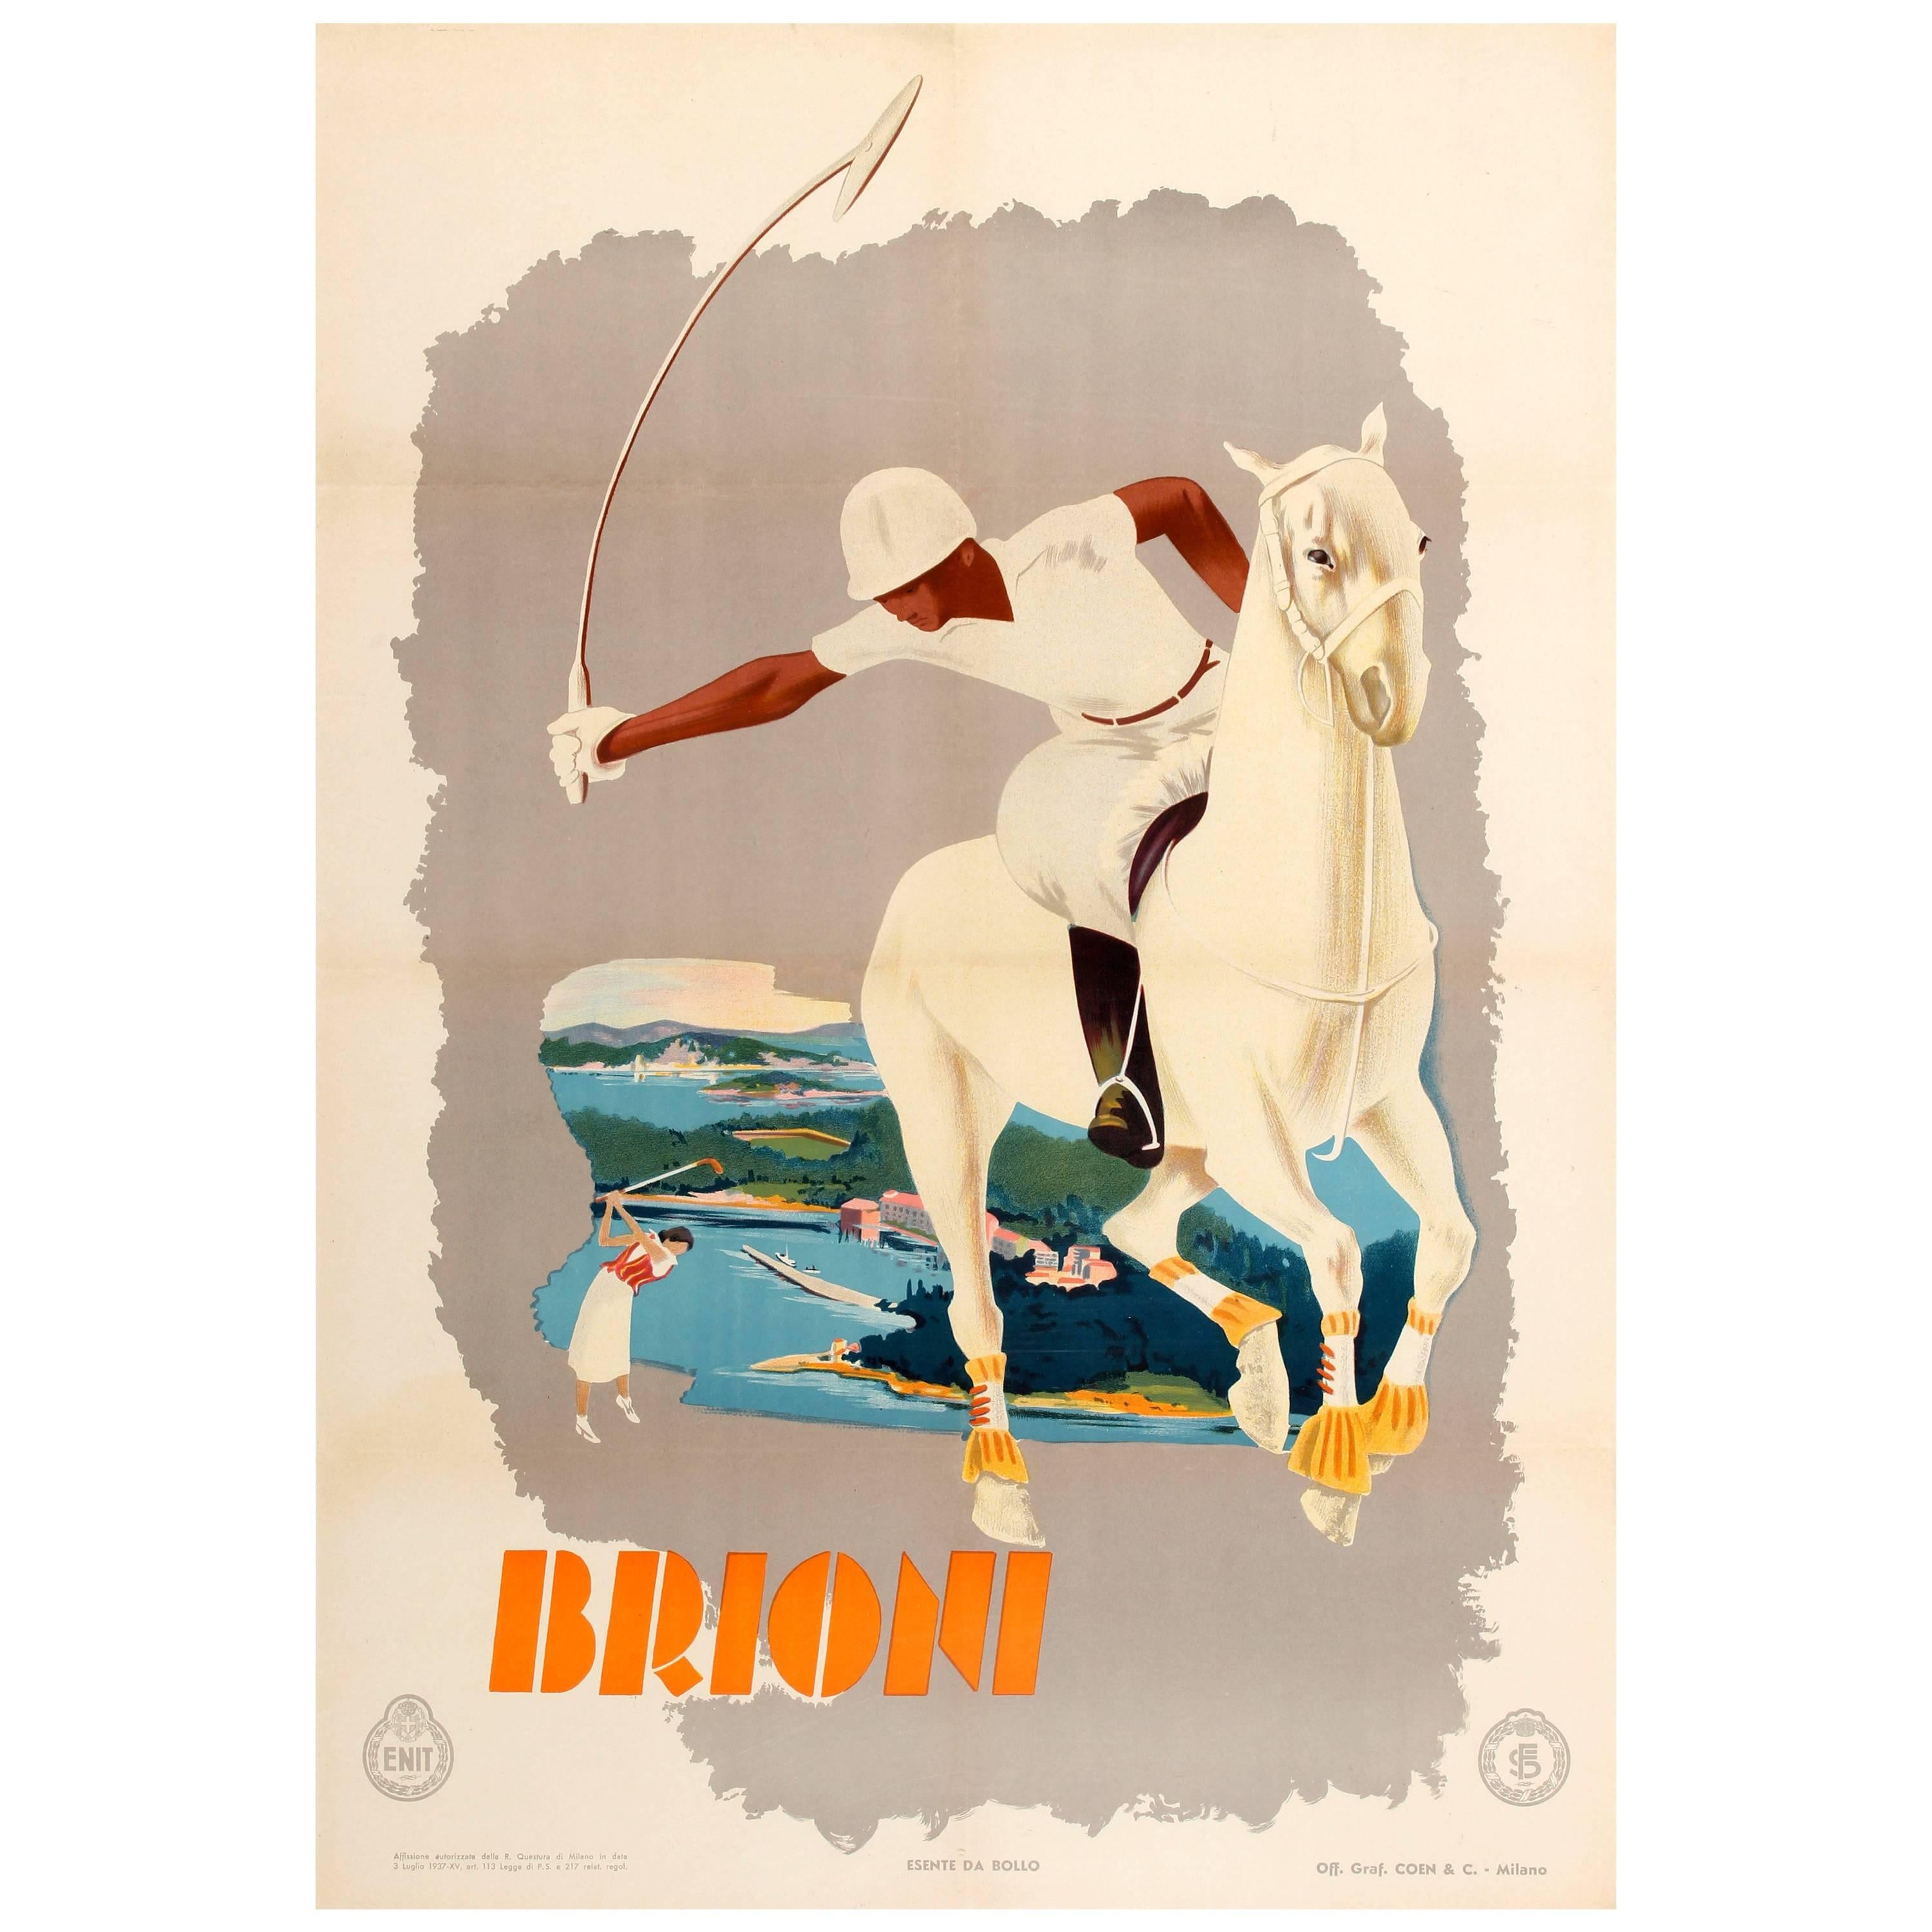 Original Vintage Enit Art Deco Poster for Briony Brijuni Featuring Polo and  Golf at 1stDibs